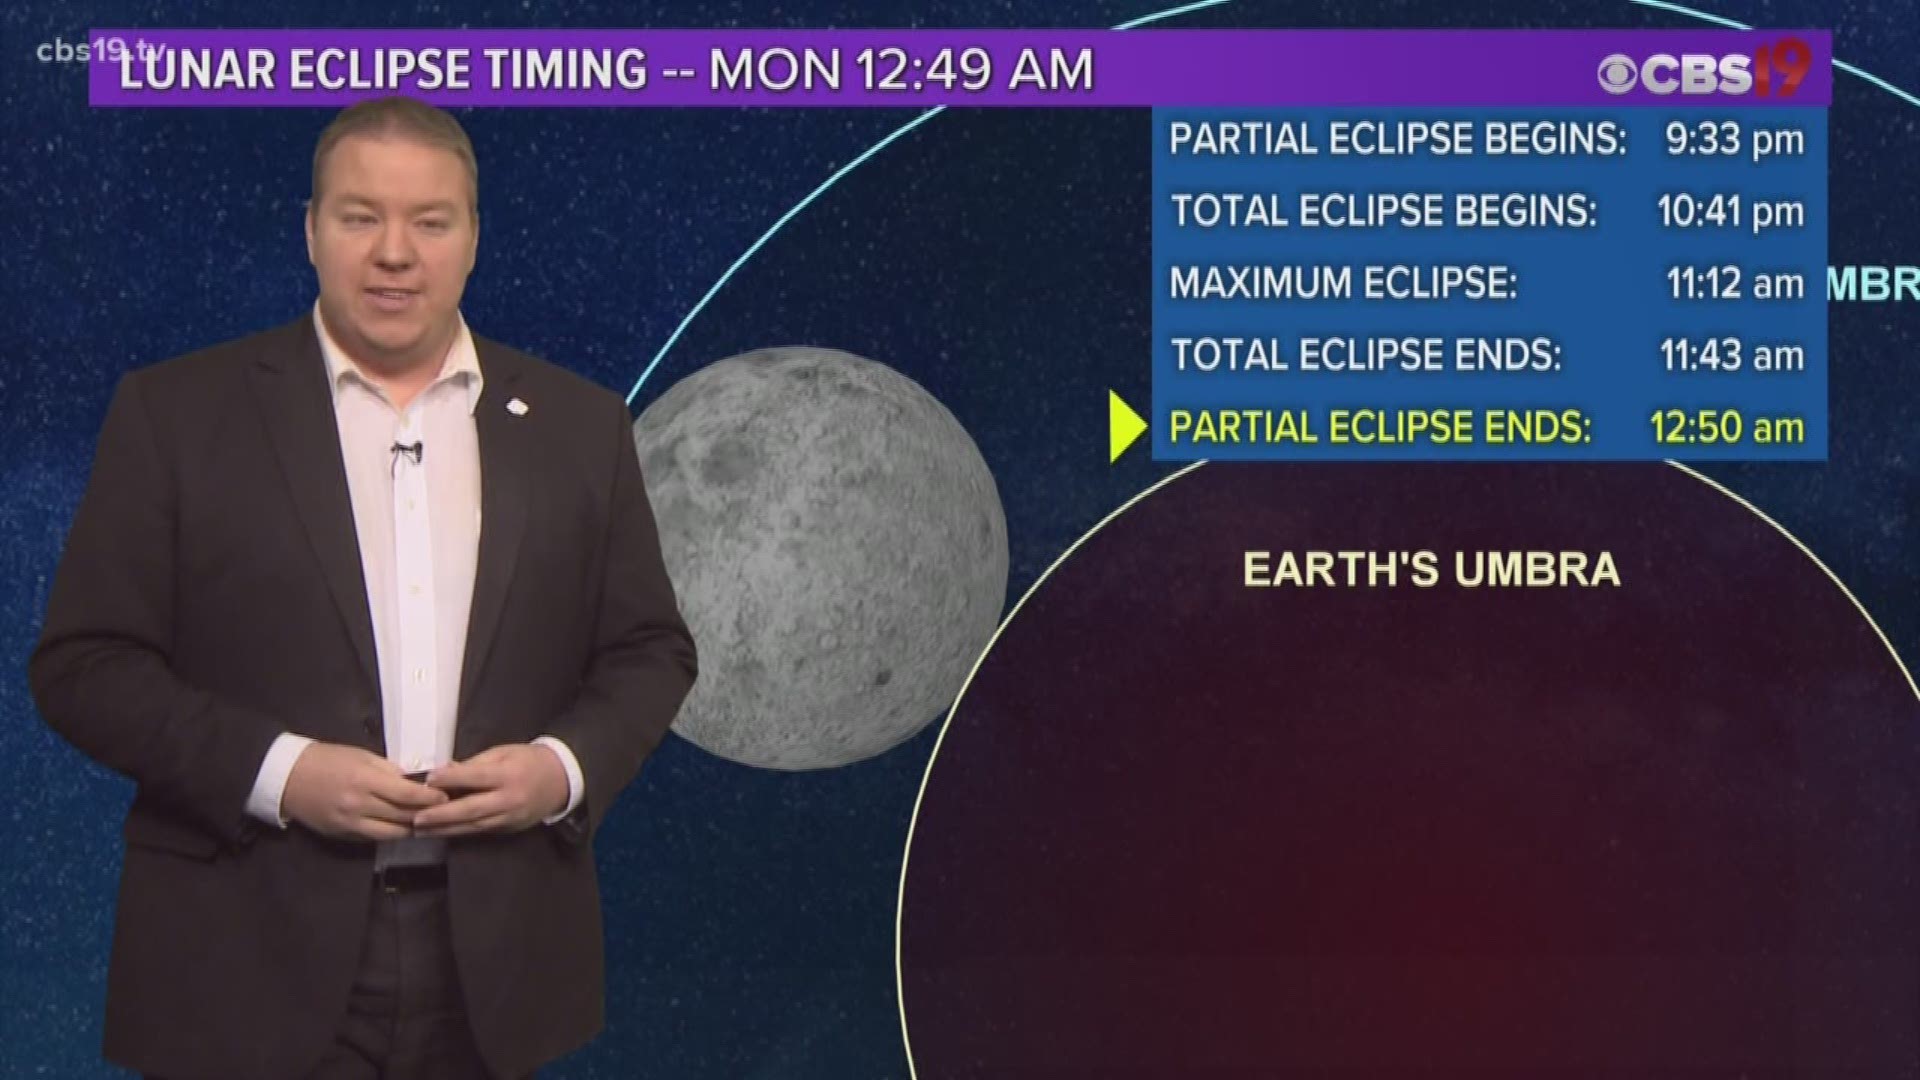 This weekend is the Super Blood Wolf Moon Lunar Eclipse, but what on earth does that actually mean? CBS 19 Meteorologist Michael Behrens breaks it all down!